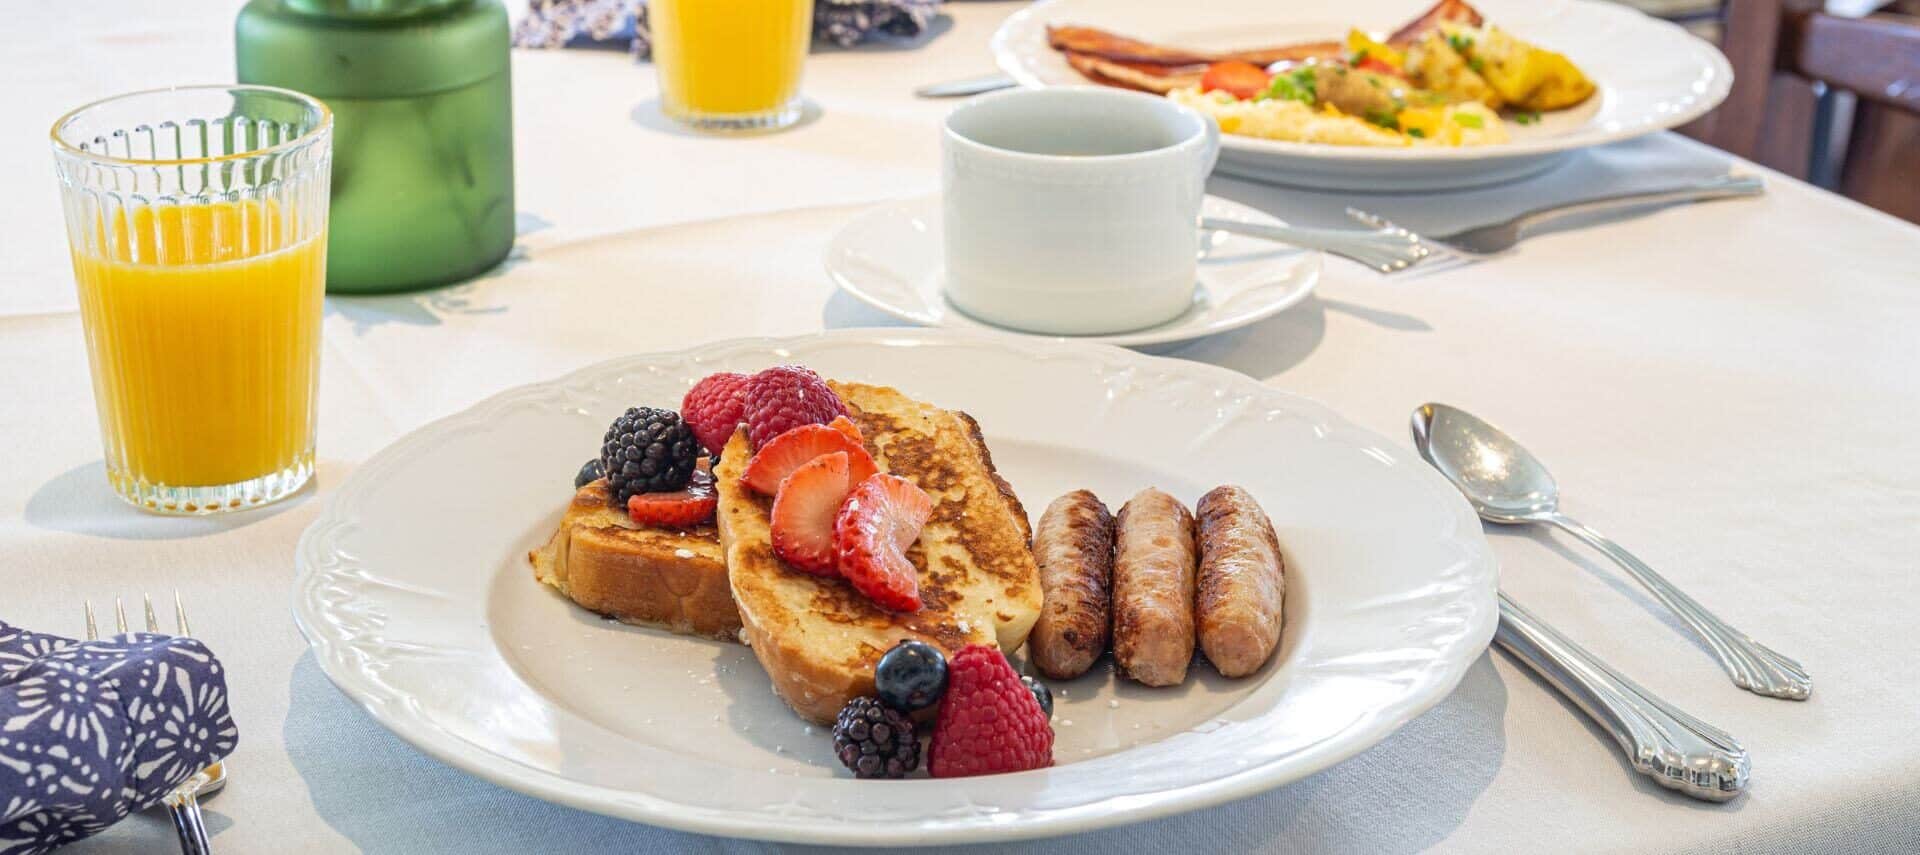 A table with a white tablecloth set for breakfast with plates of french toast topped with fruit, sausage, eggs, and bacon, along with a cup of coffee and glasses of orange juice.